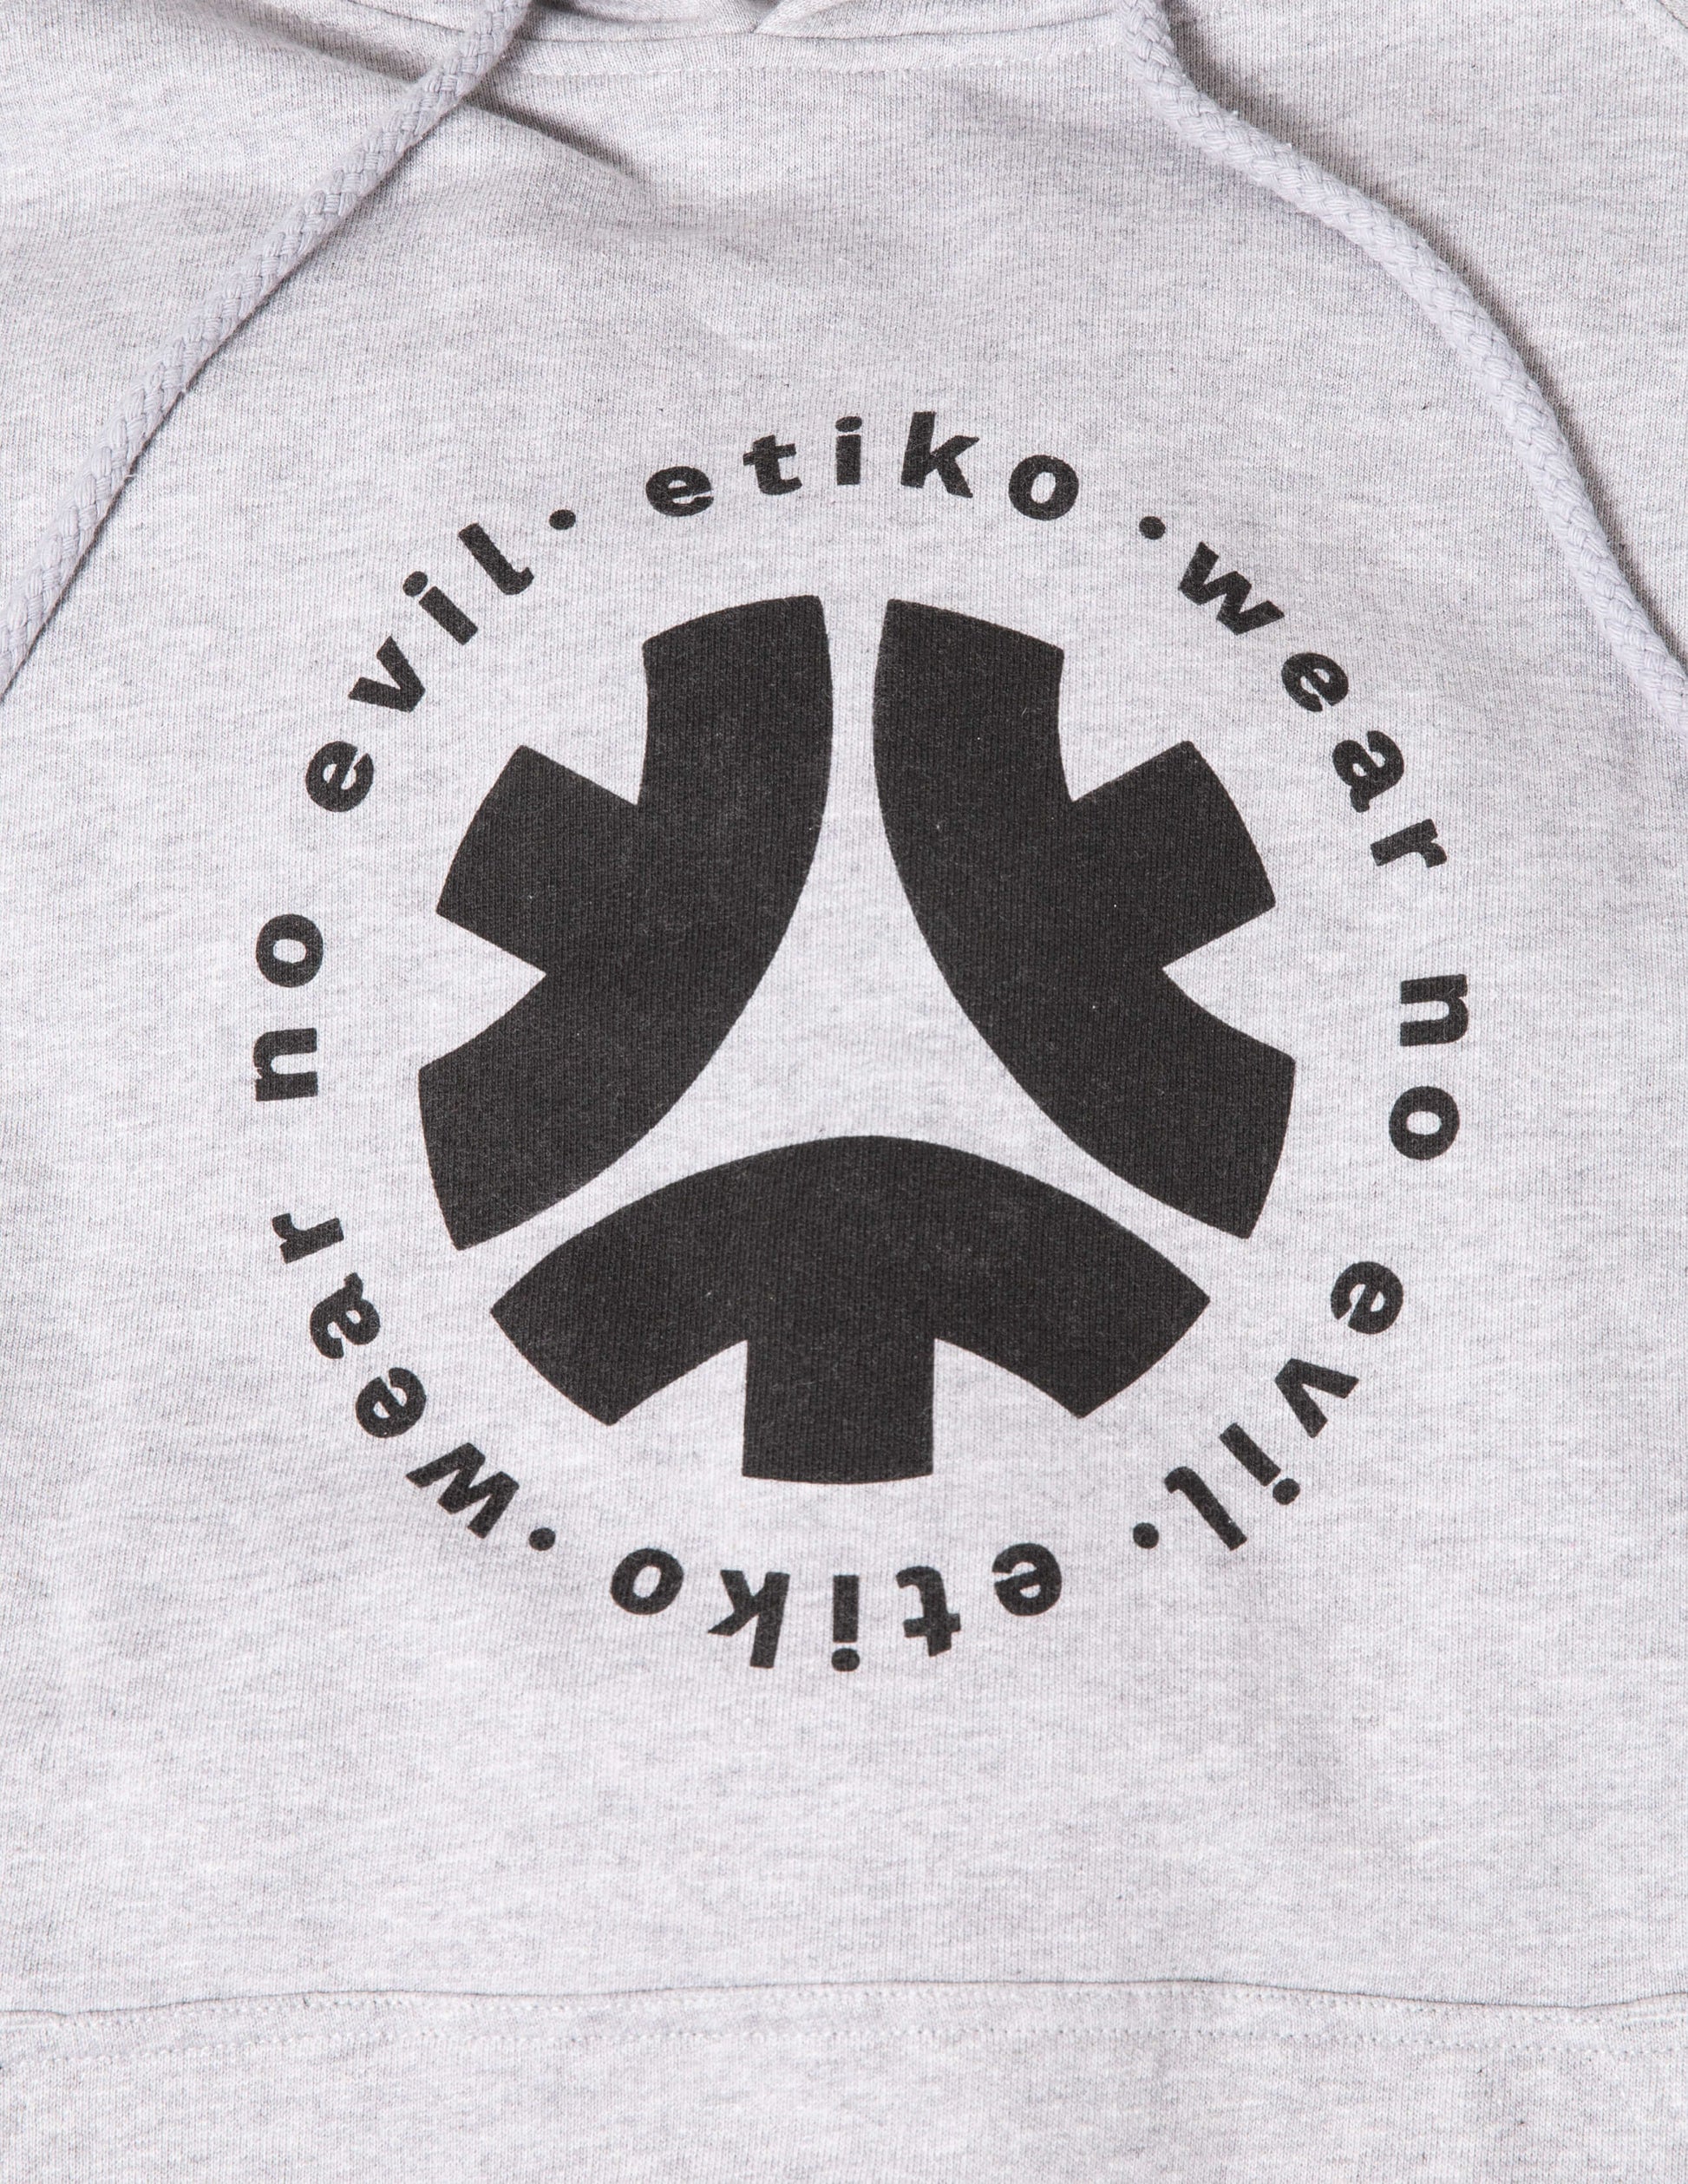 Etiko Fairtrade Certified Organic Cotton Wear No Evil Printed Grey and Black Unisex Pullover Hoodie